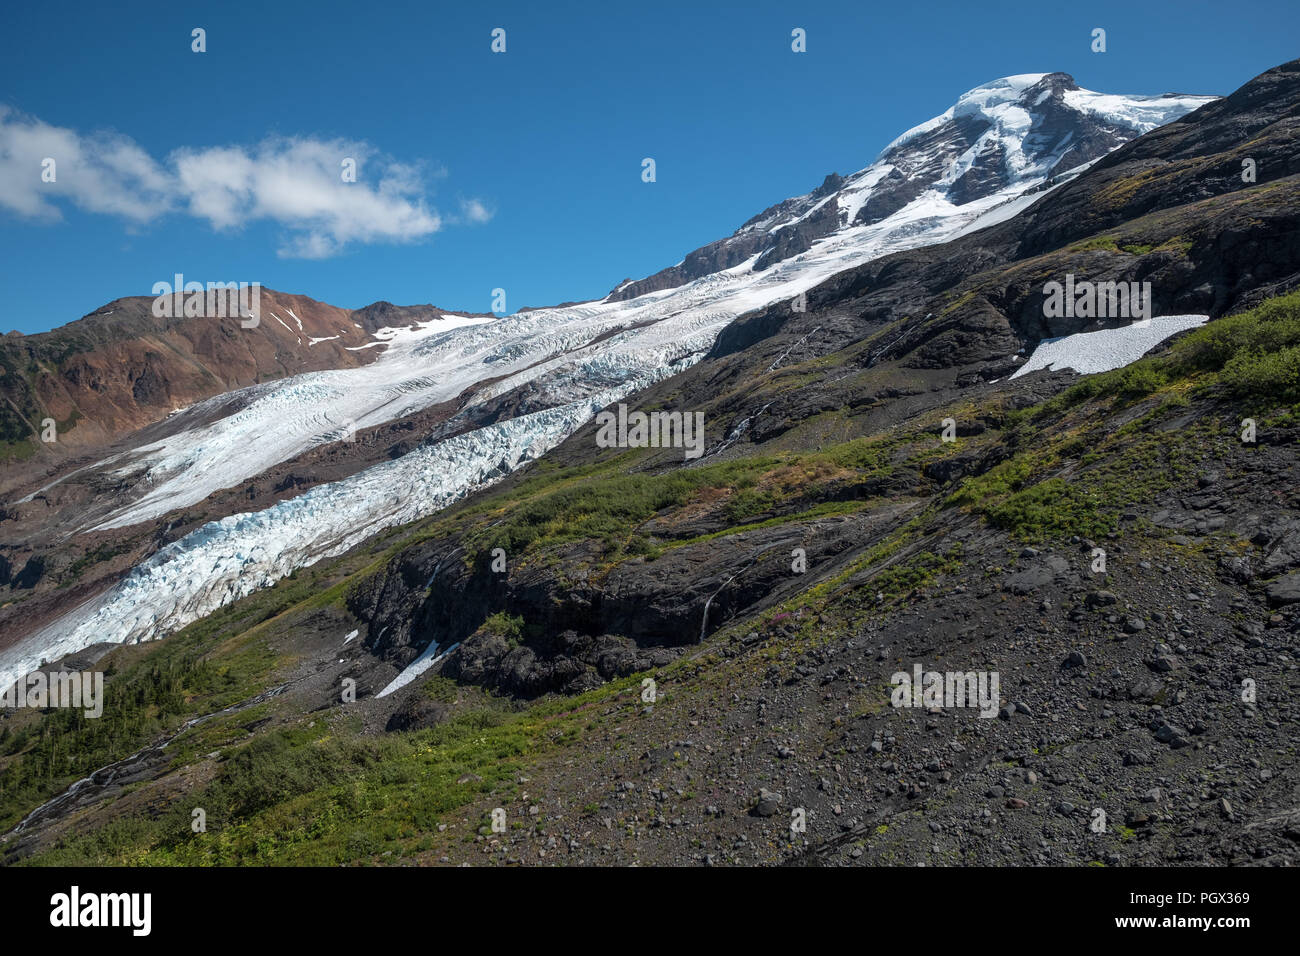 At the end of August, all of winter's snow has melted on Washington State's Mount Baker leaving only glaciers - including Coleman and Roosevelt - to c Stock Photo